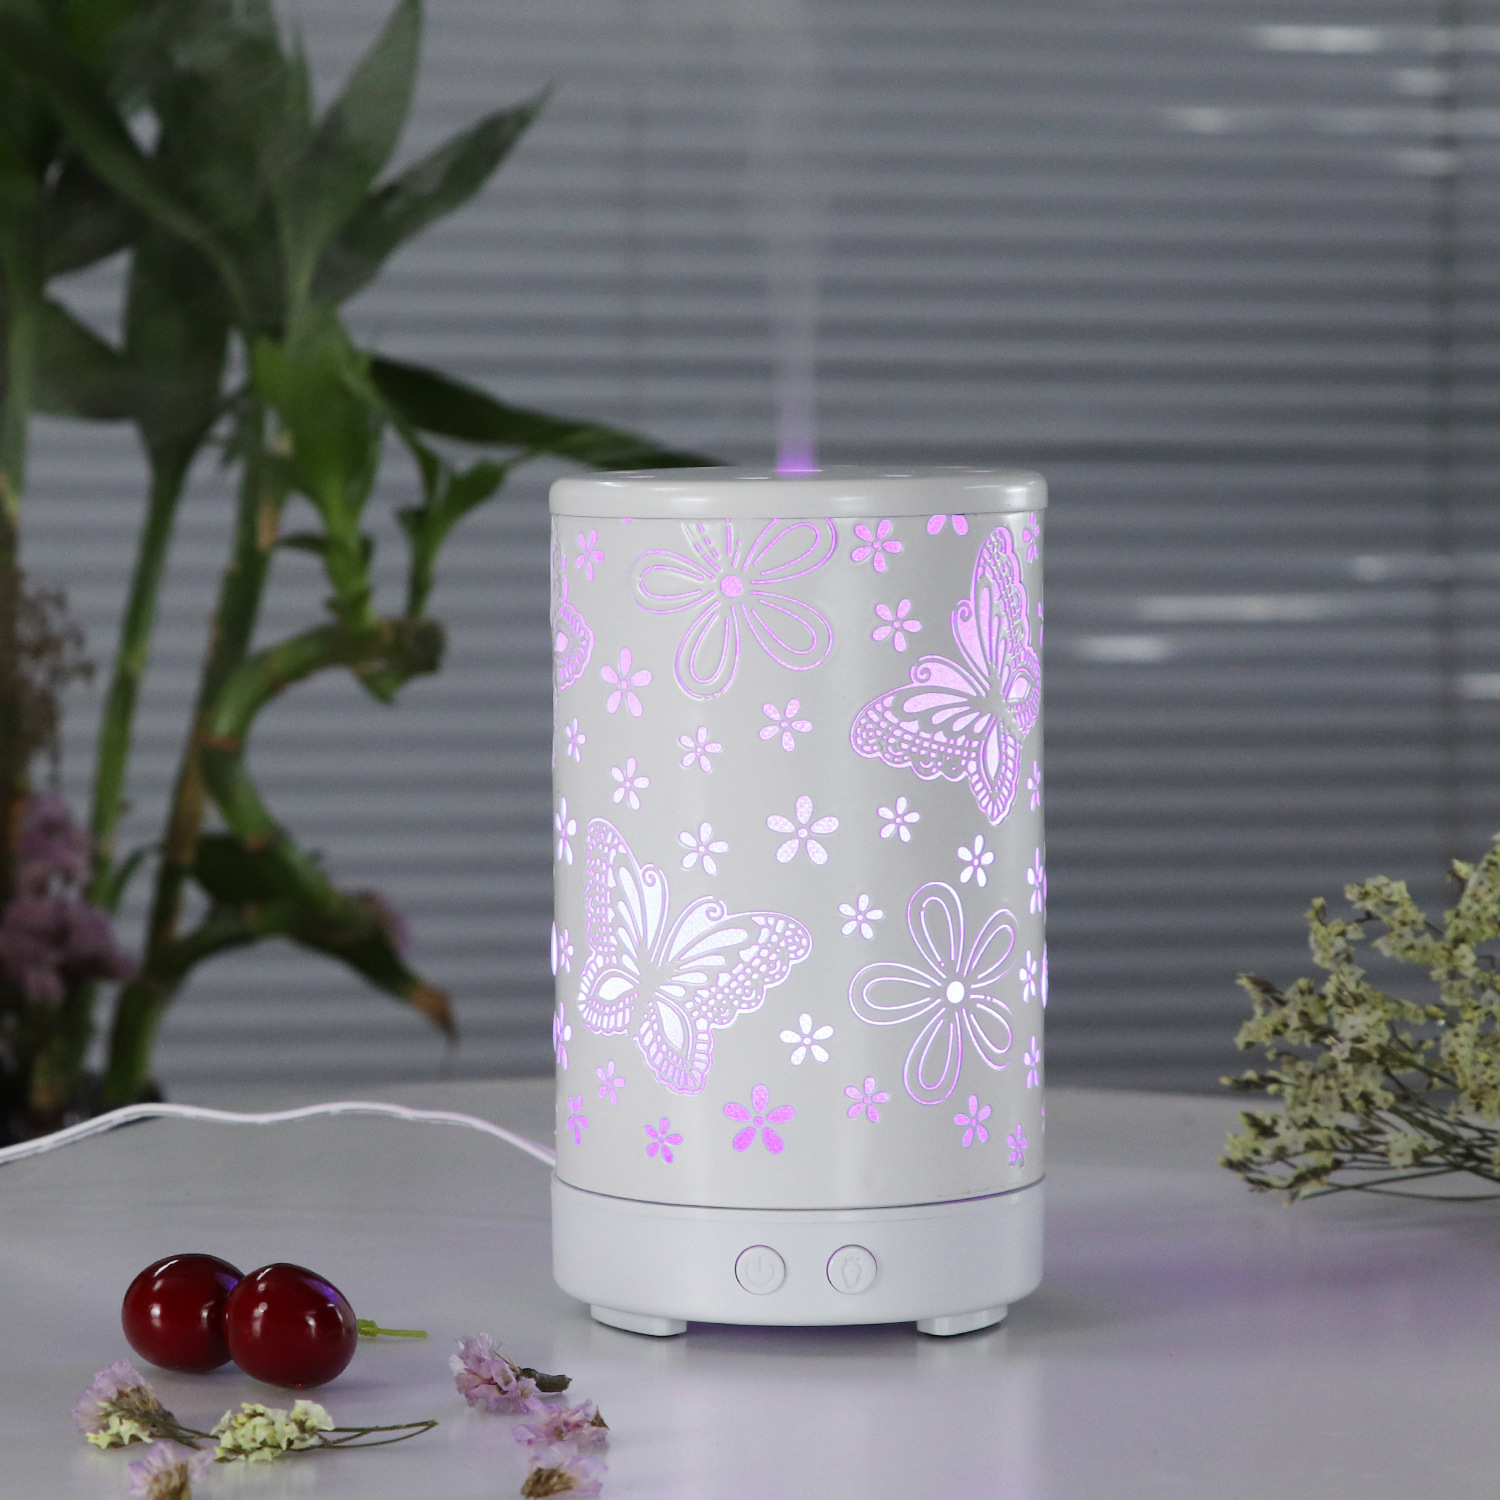 100ml Iron Shell Butterfly Timing LED Ultrasonic Aroma Diffuser Humidifier